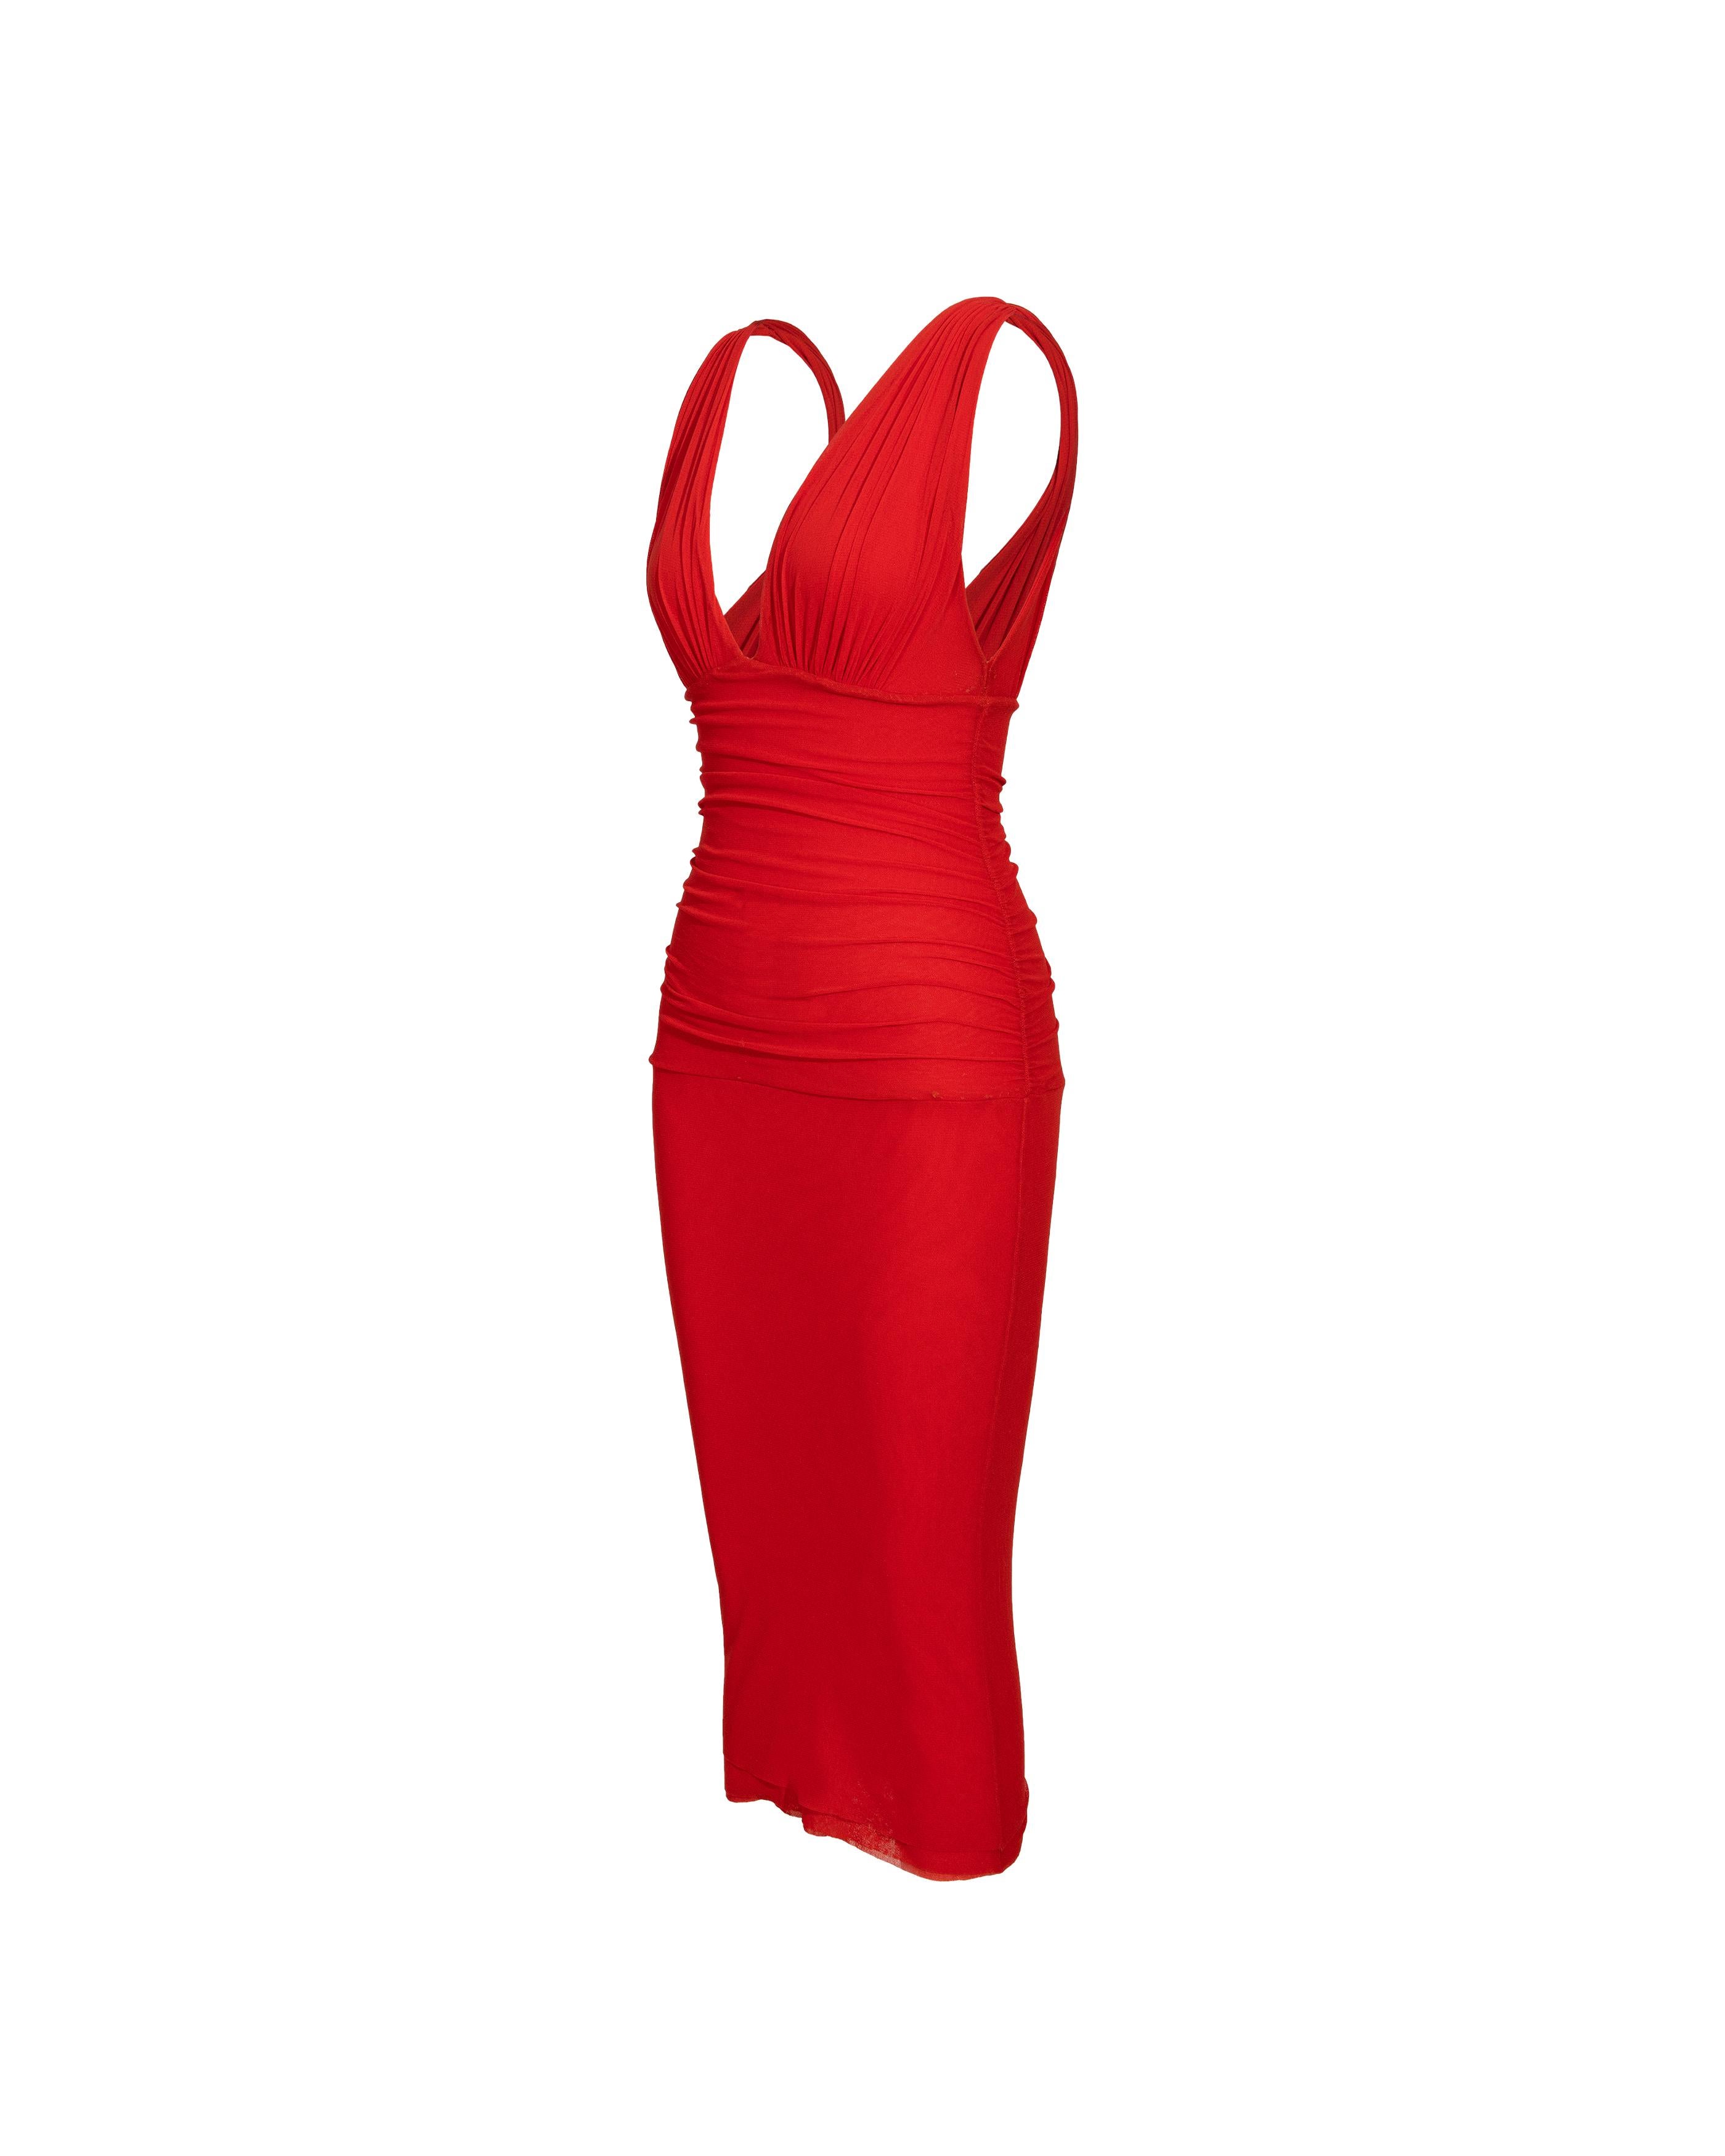 2000's Jean Paul Gaultier 'Soleil' red below-knee sleeveless dress. V-neck dress with gathered, fitted drop waist and gathered straps. Fabric Contents: 100% Nylon (feels like stretch mesh). Raw hemline with three layers of fabric creating beautiful